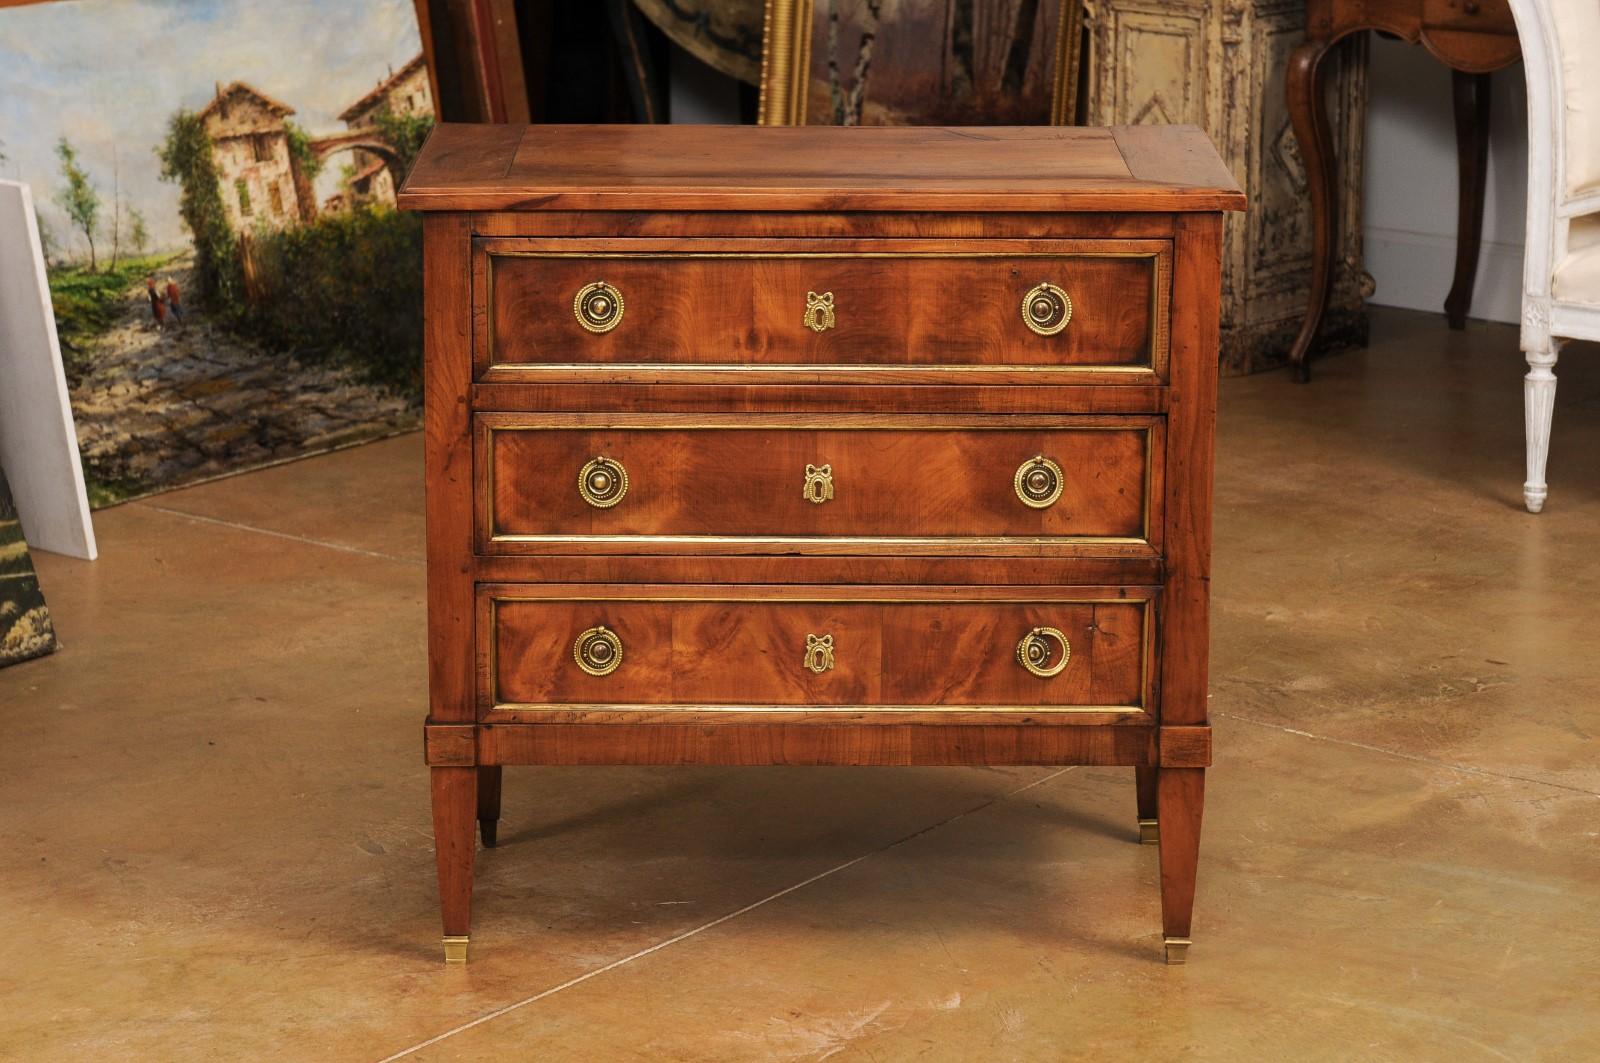 A French Louis XVI style cherry commode from the 19th century, with three drawers, brass hardware, ribbon tied escutcheons and tapered legs. Created in France during the 19th century, this cherry commode showcases the stylistic characteristics of